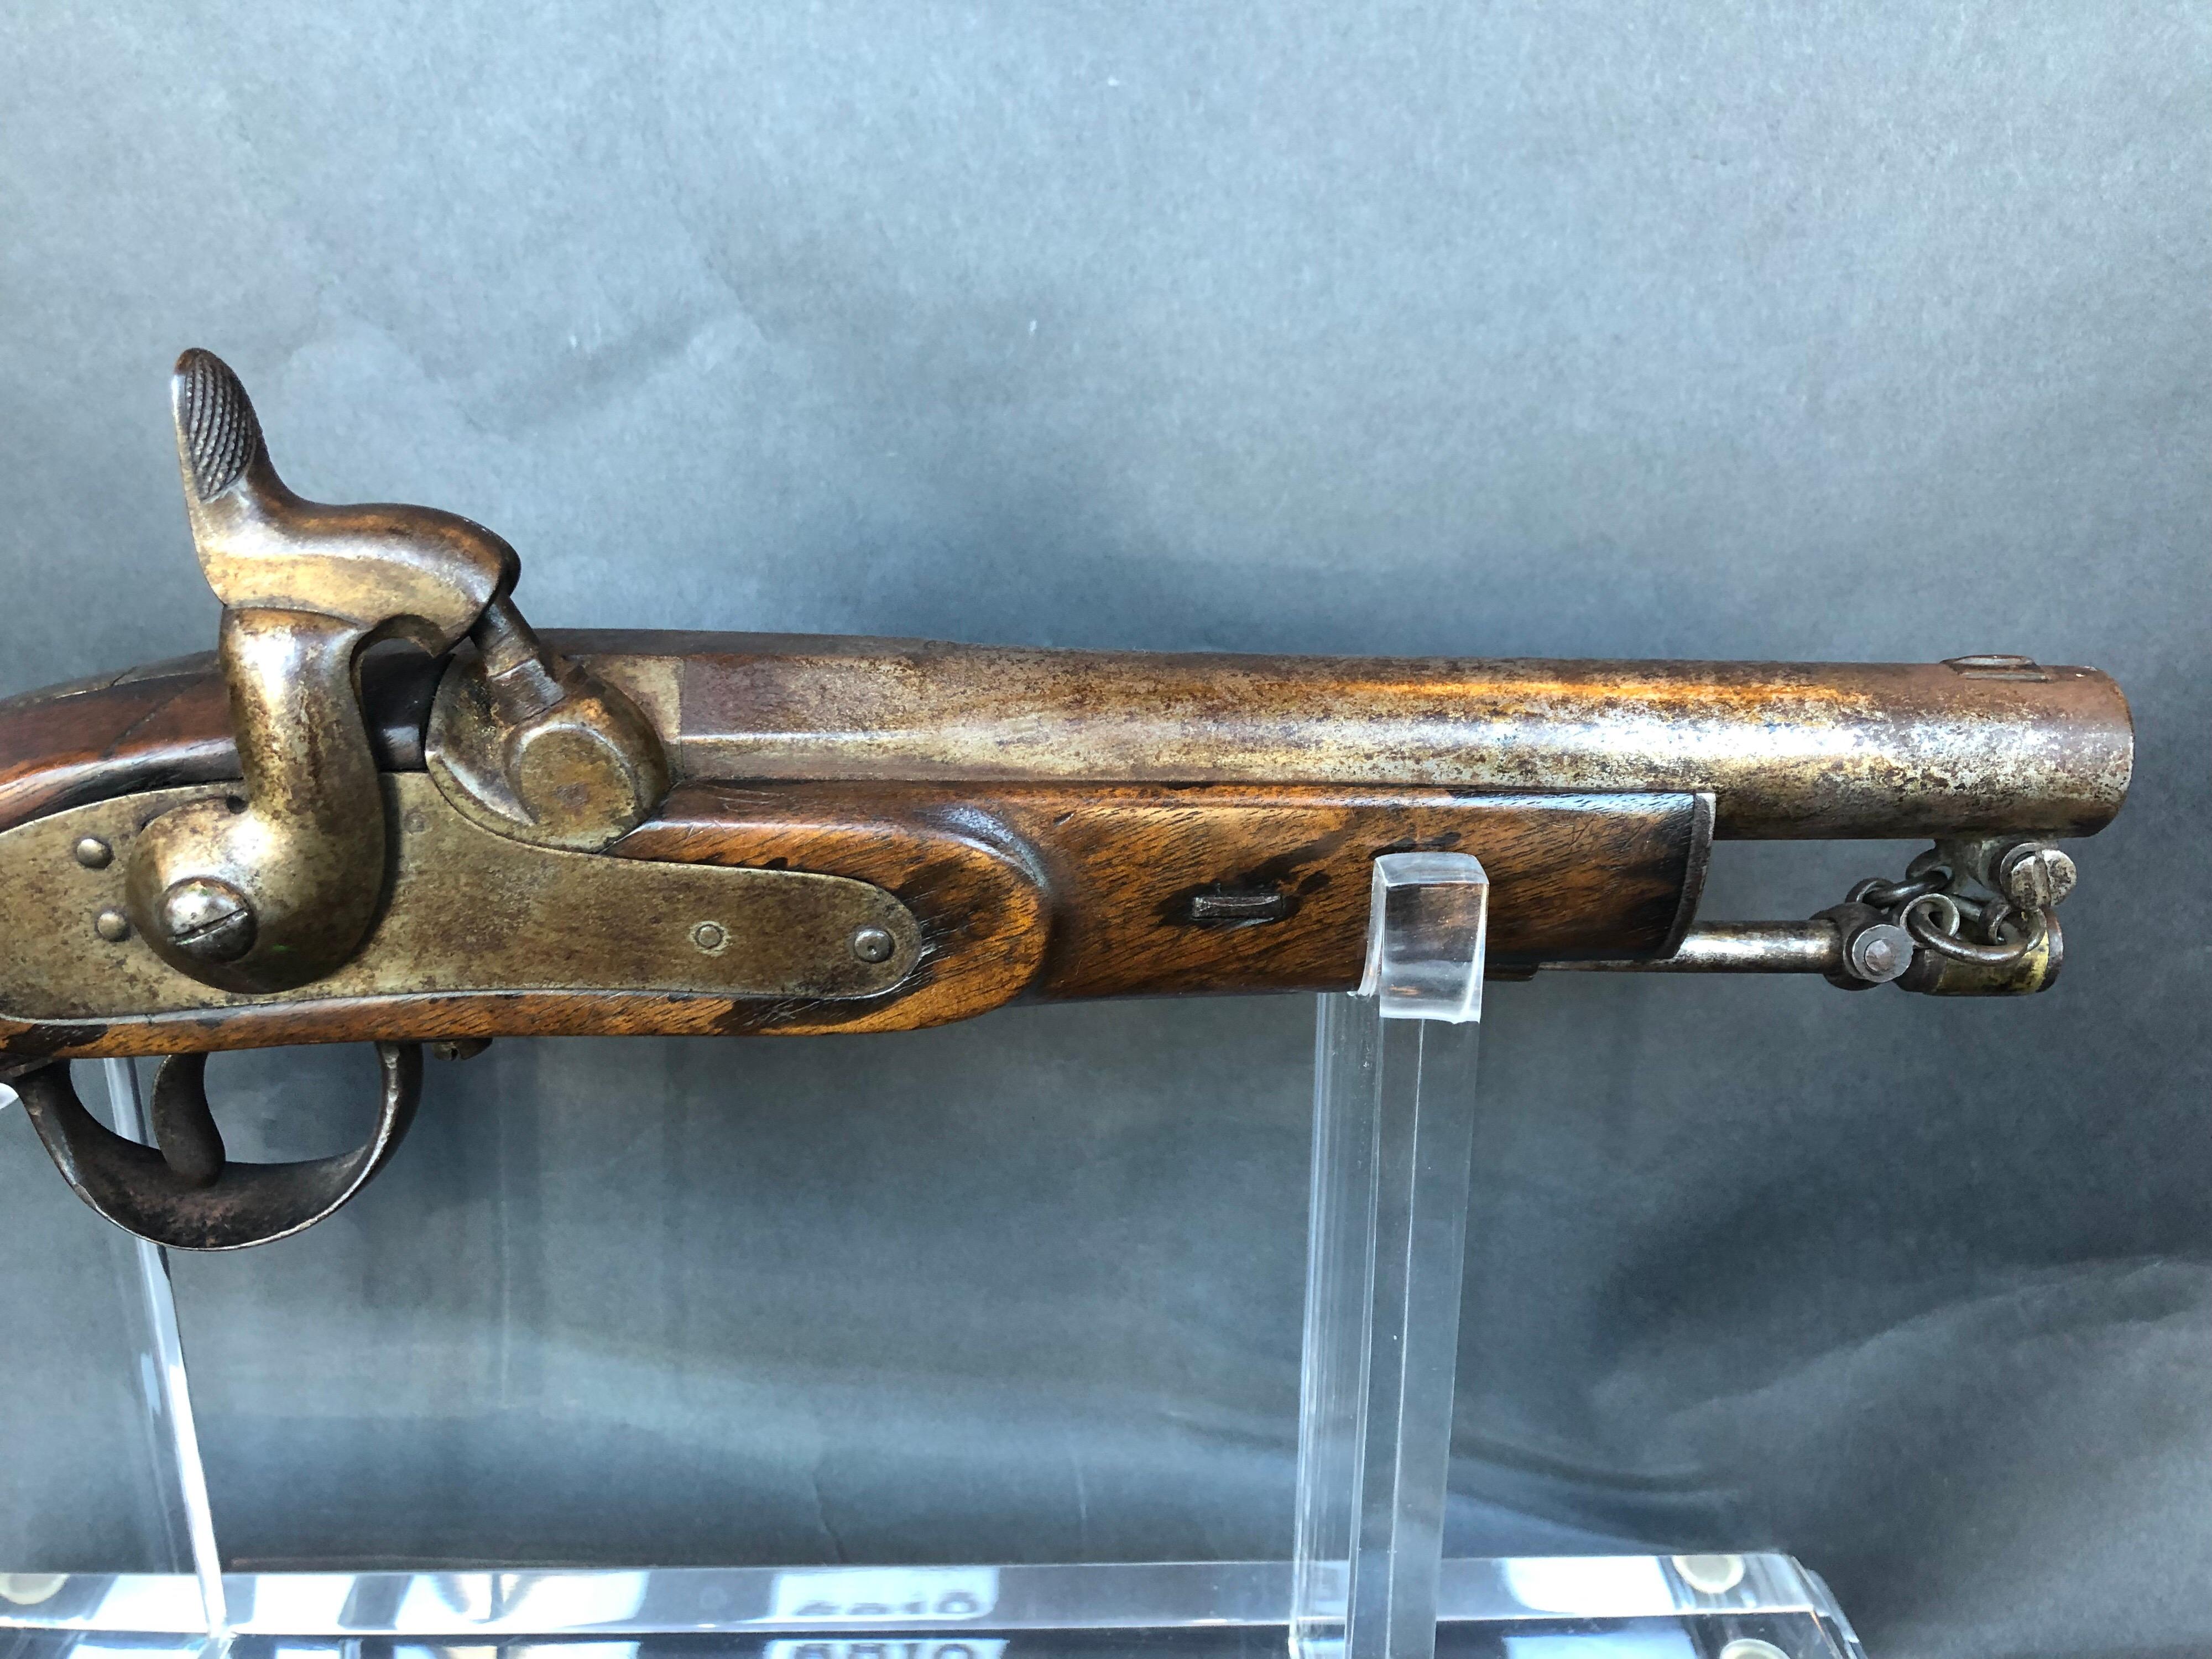 Flint lock pistol. Measures: 8.5 inches H x 14 inches W x 2.2 inches D.